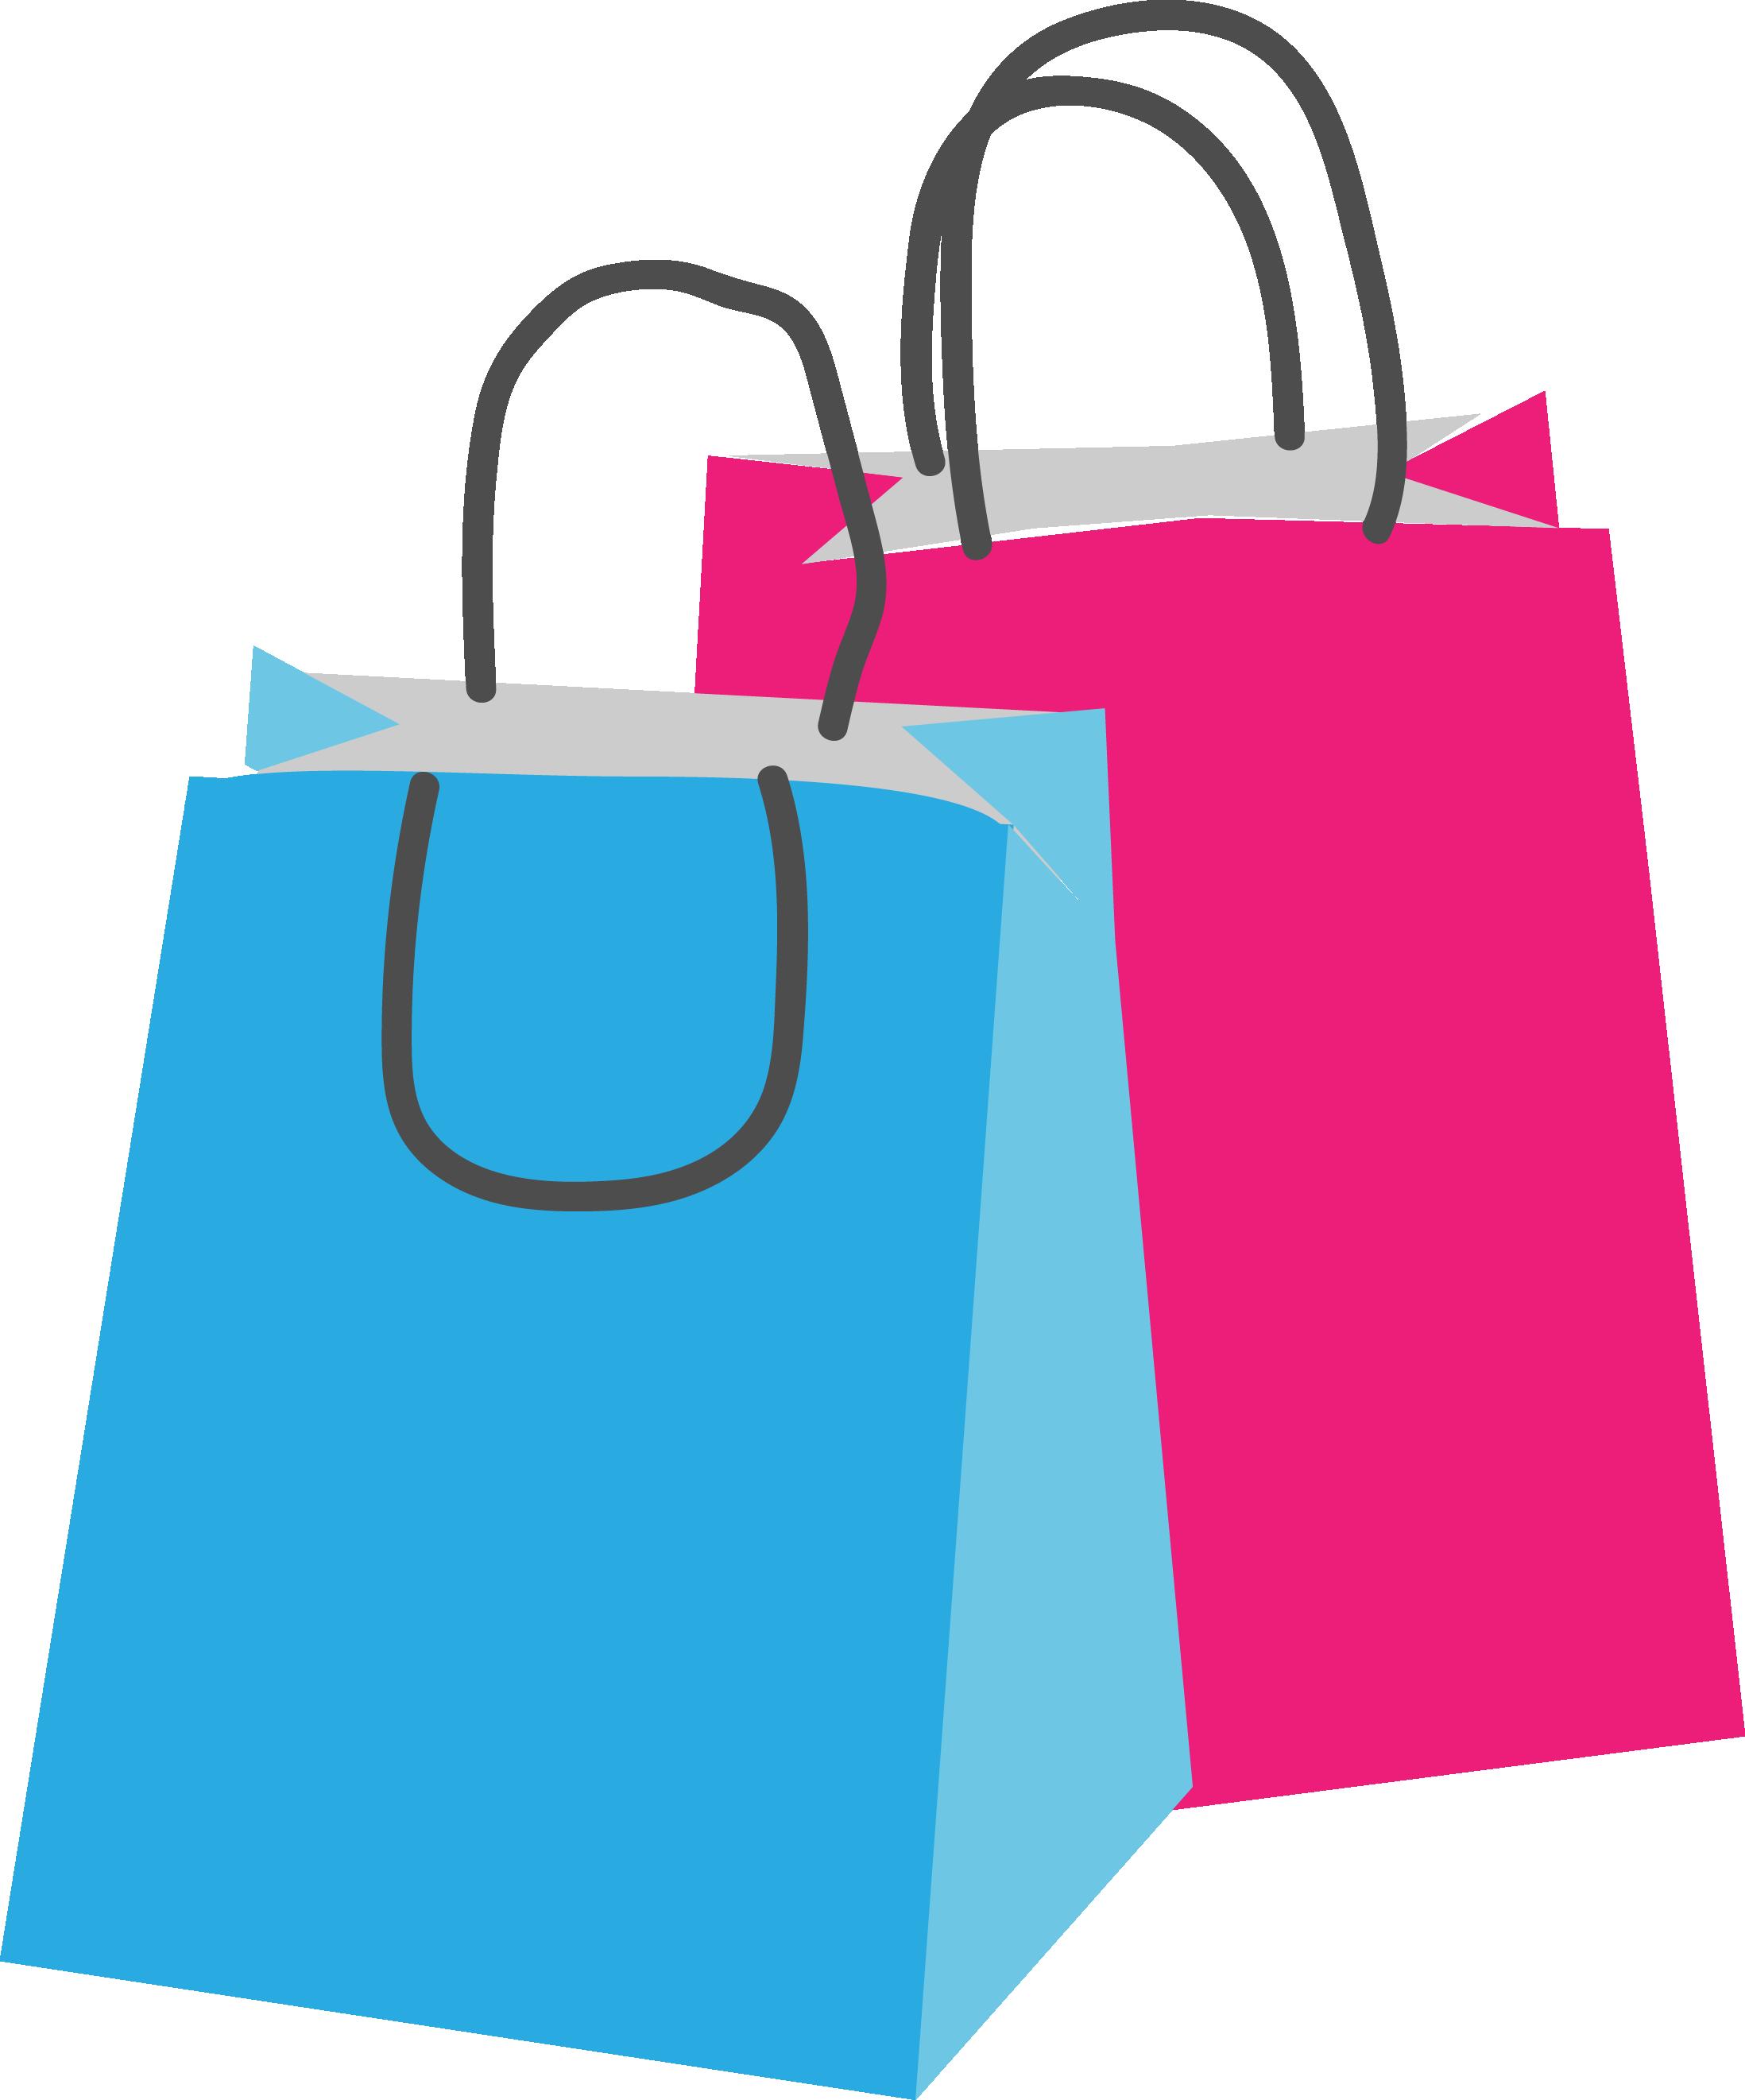 Cartoon Shopping Bag Clipart Transparent Background, Two Cartoon Shopping  Bags, Shopping Bag Clipart, Shopping Bags, Bags PNG Image For Free Download